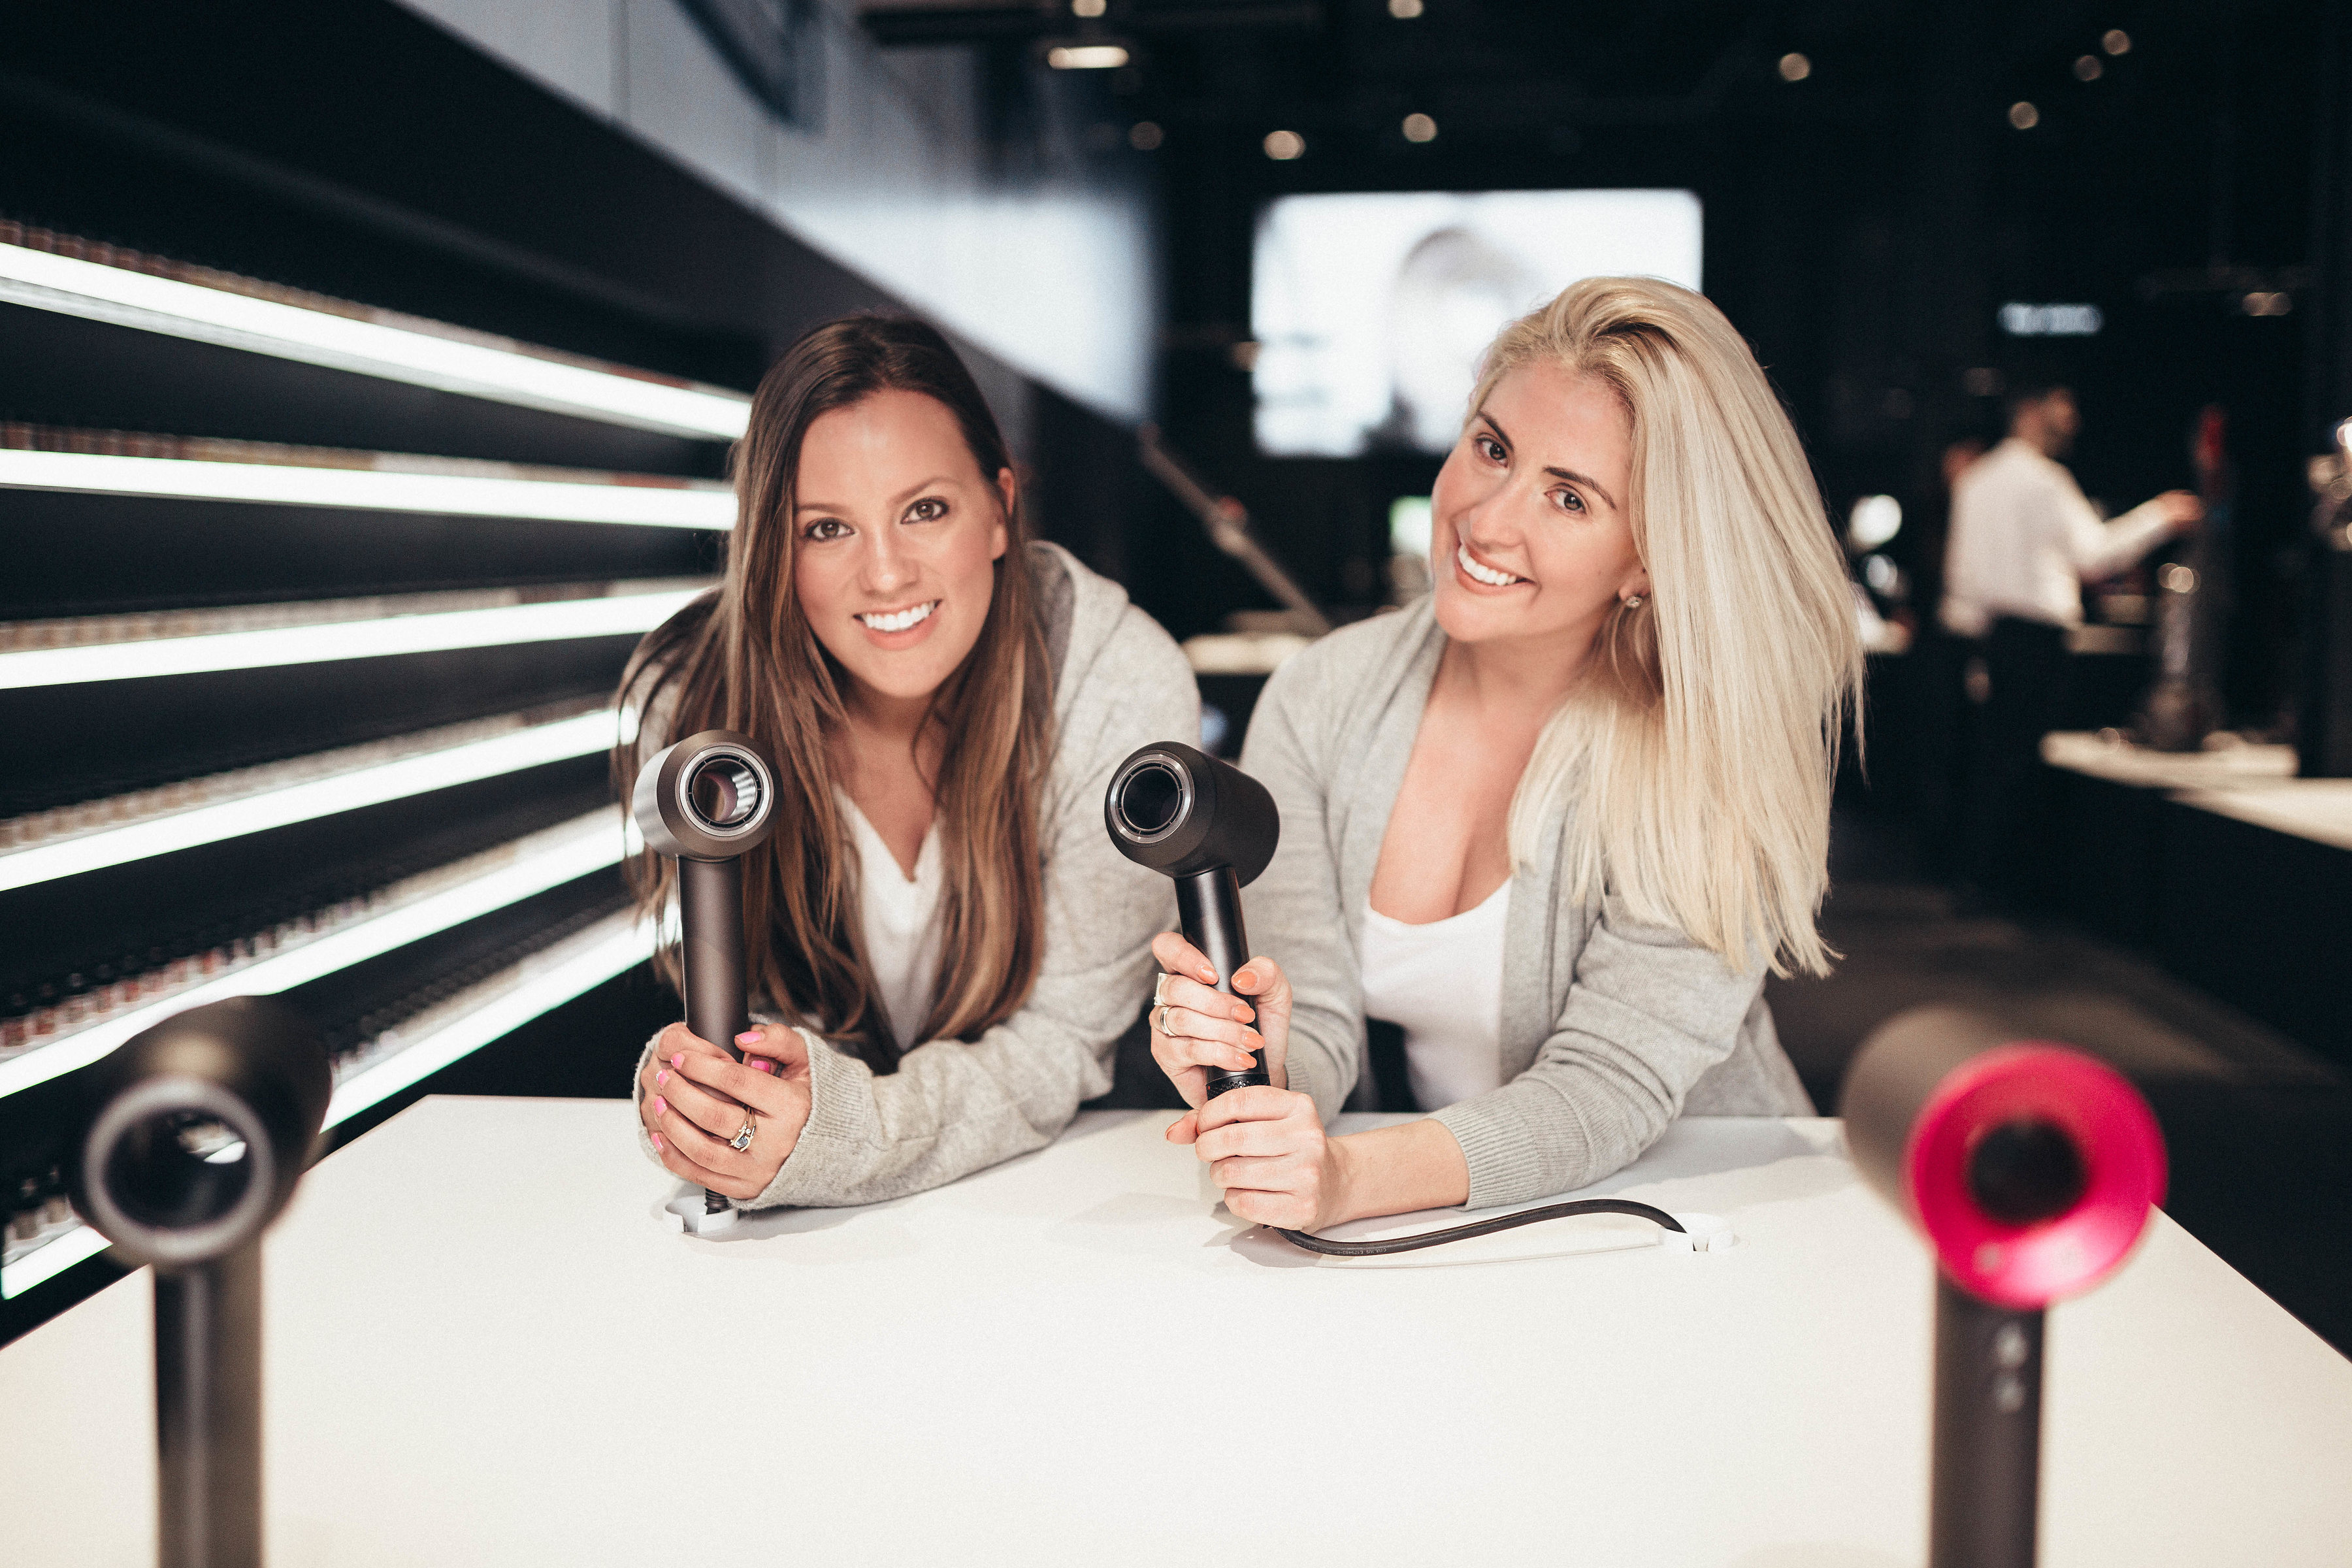 Ashley Zeal from Two Peas in a Prada shares her love for Dyson technology including the supersonic hair dryer and the air purifier. Plus an event in SF!